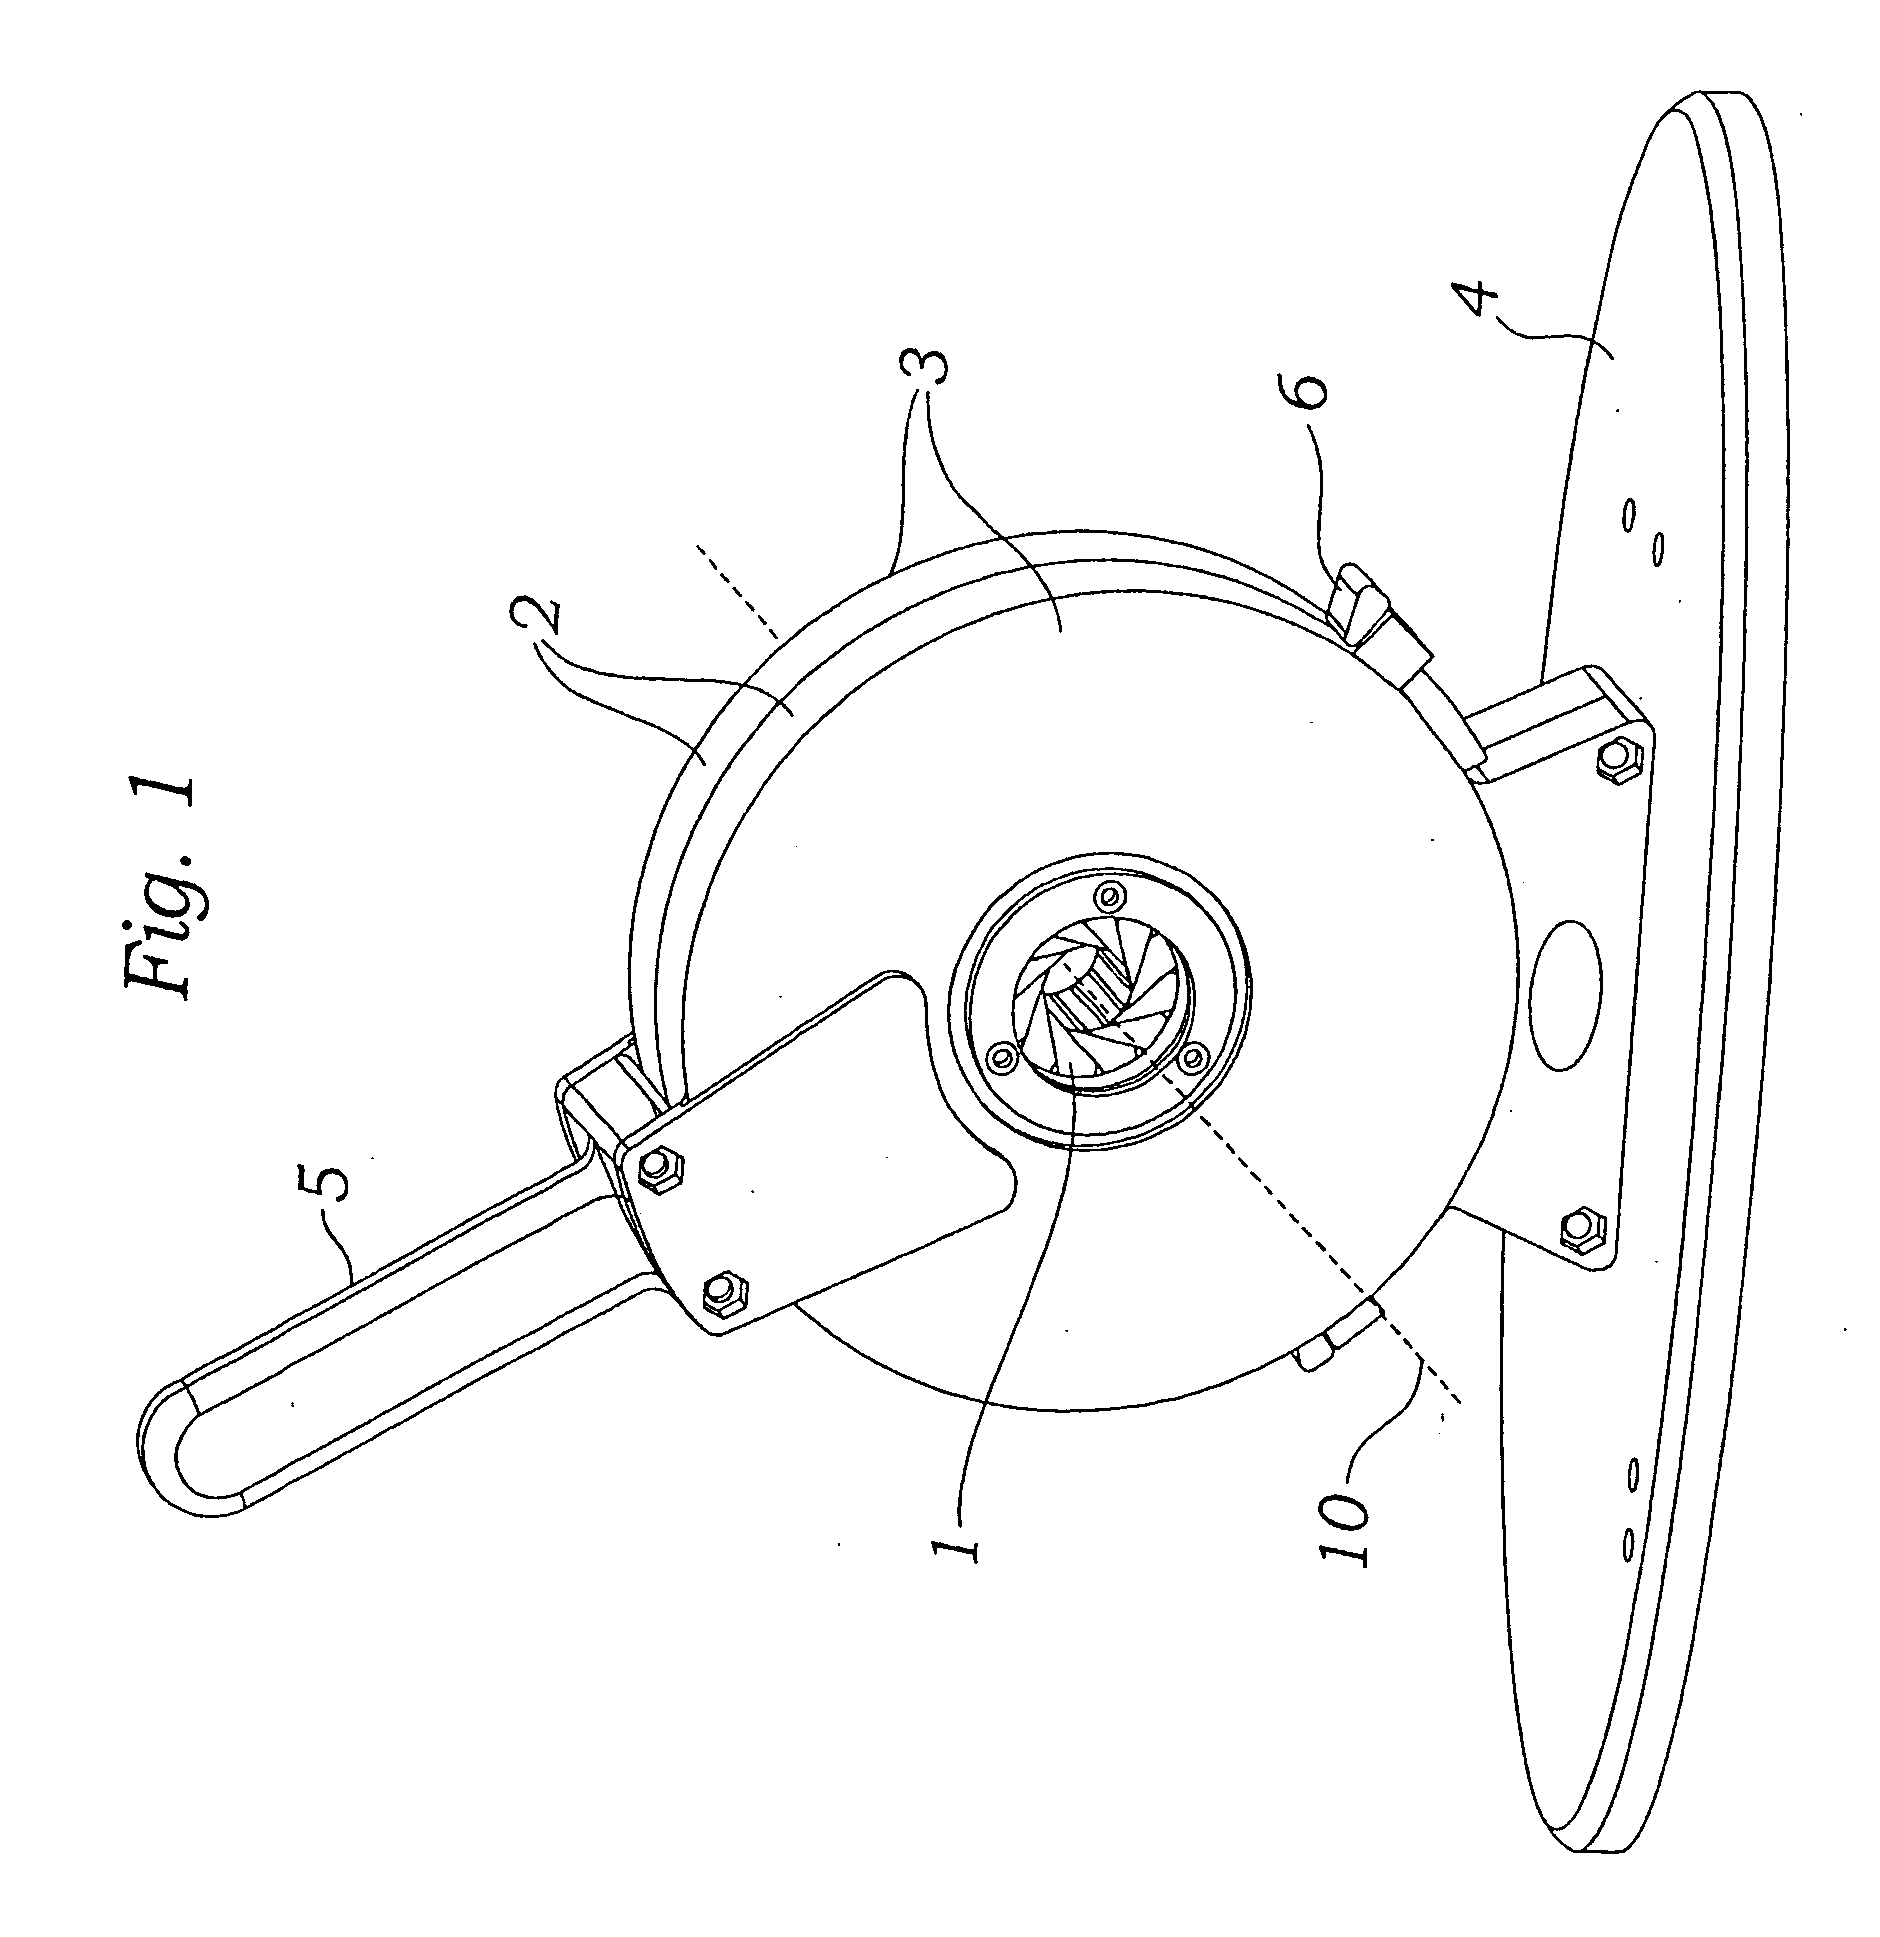 Method of crimping a prosthetic valve